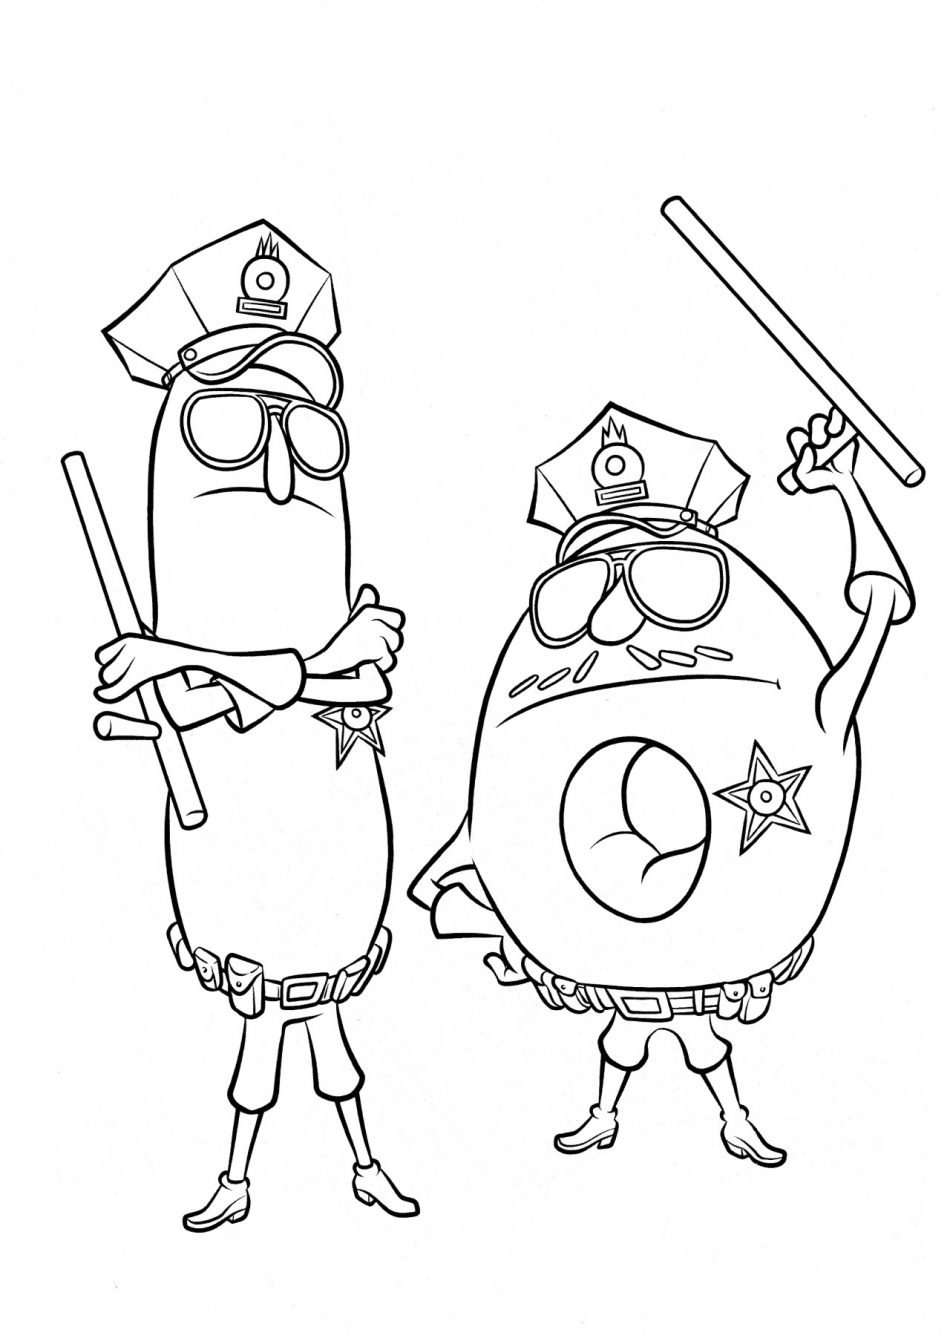 Disney Donut Police Officers Coloring Pages